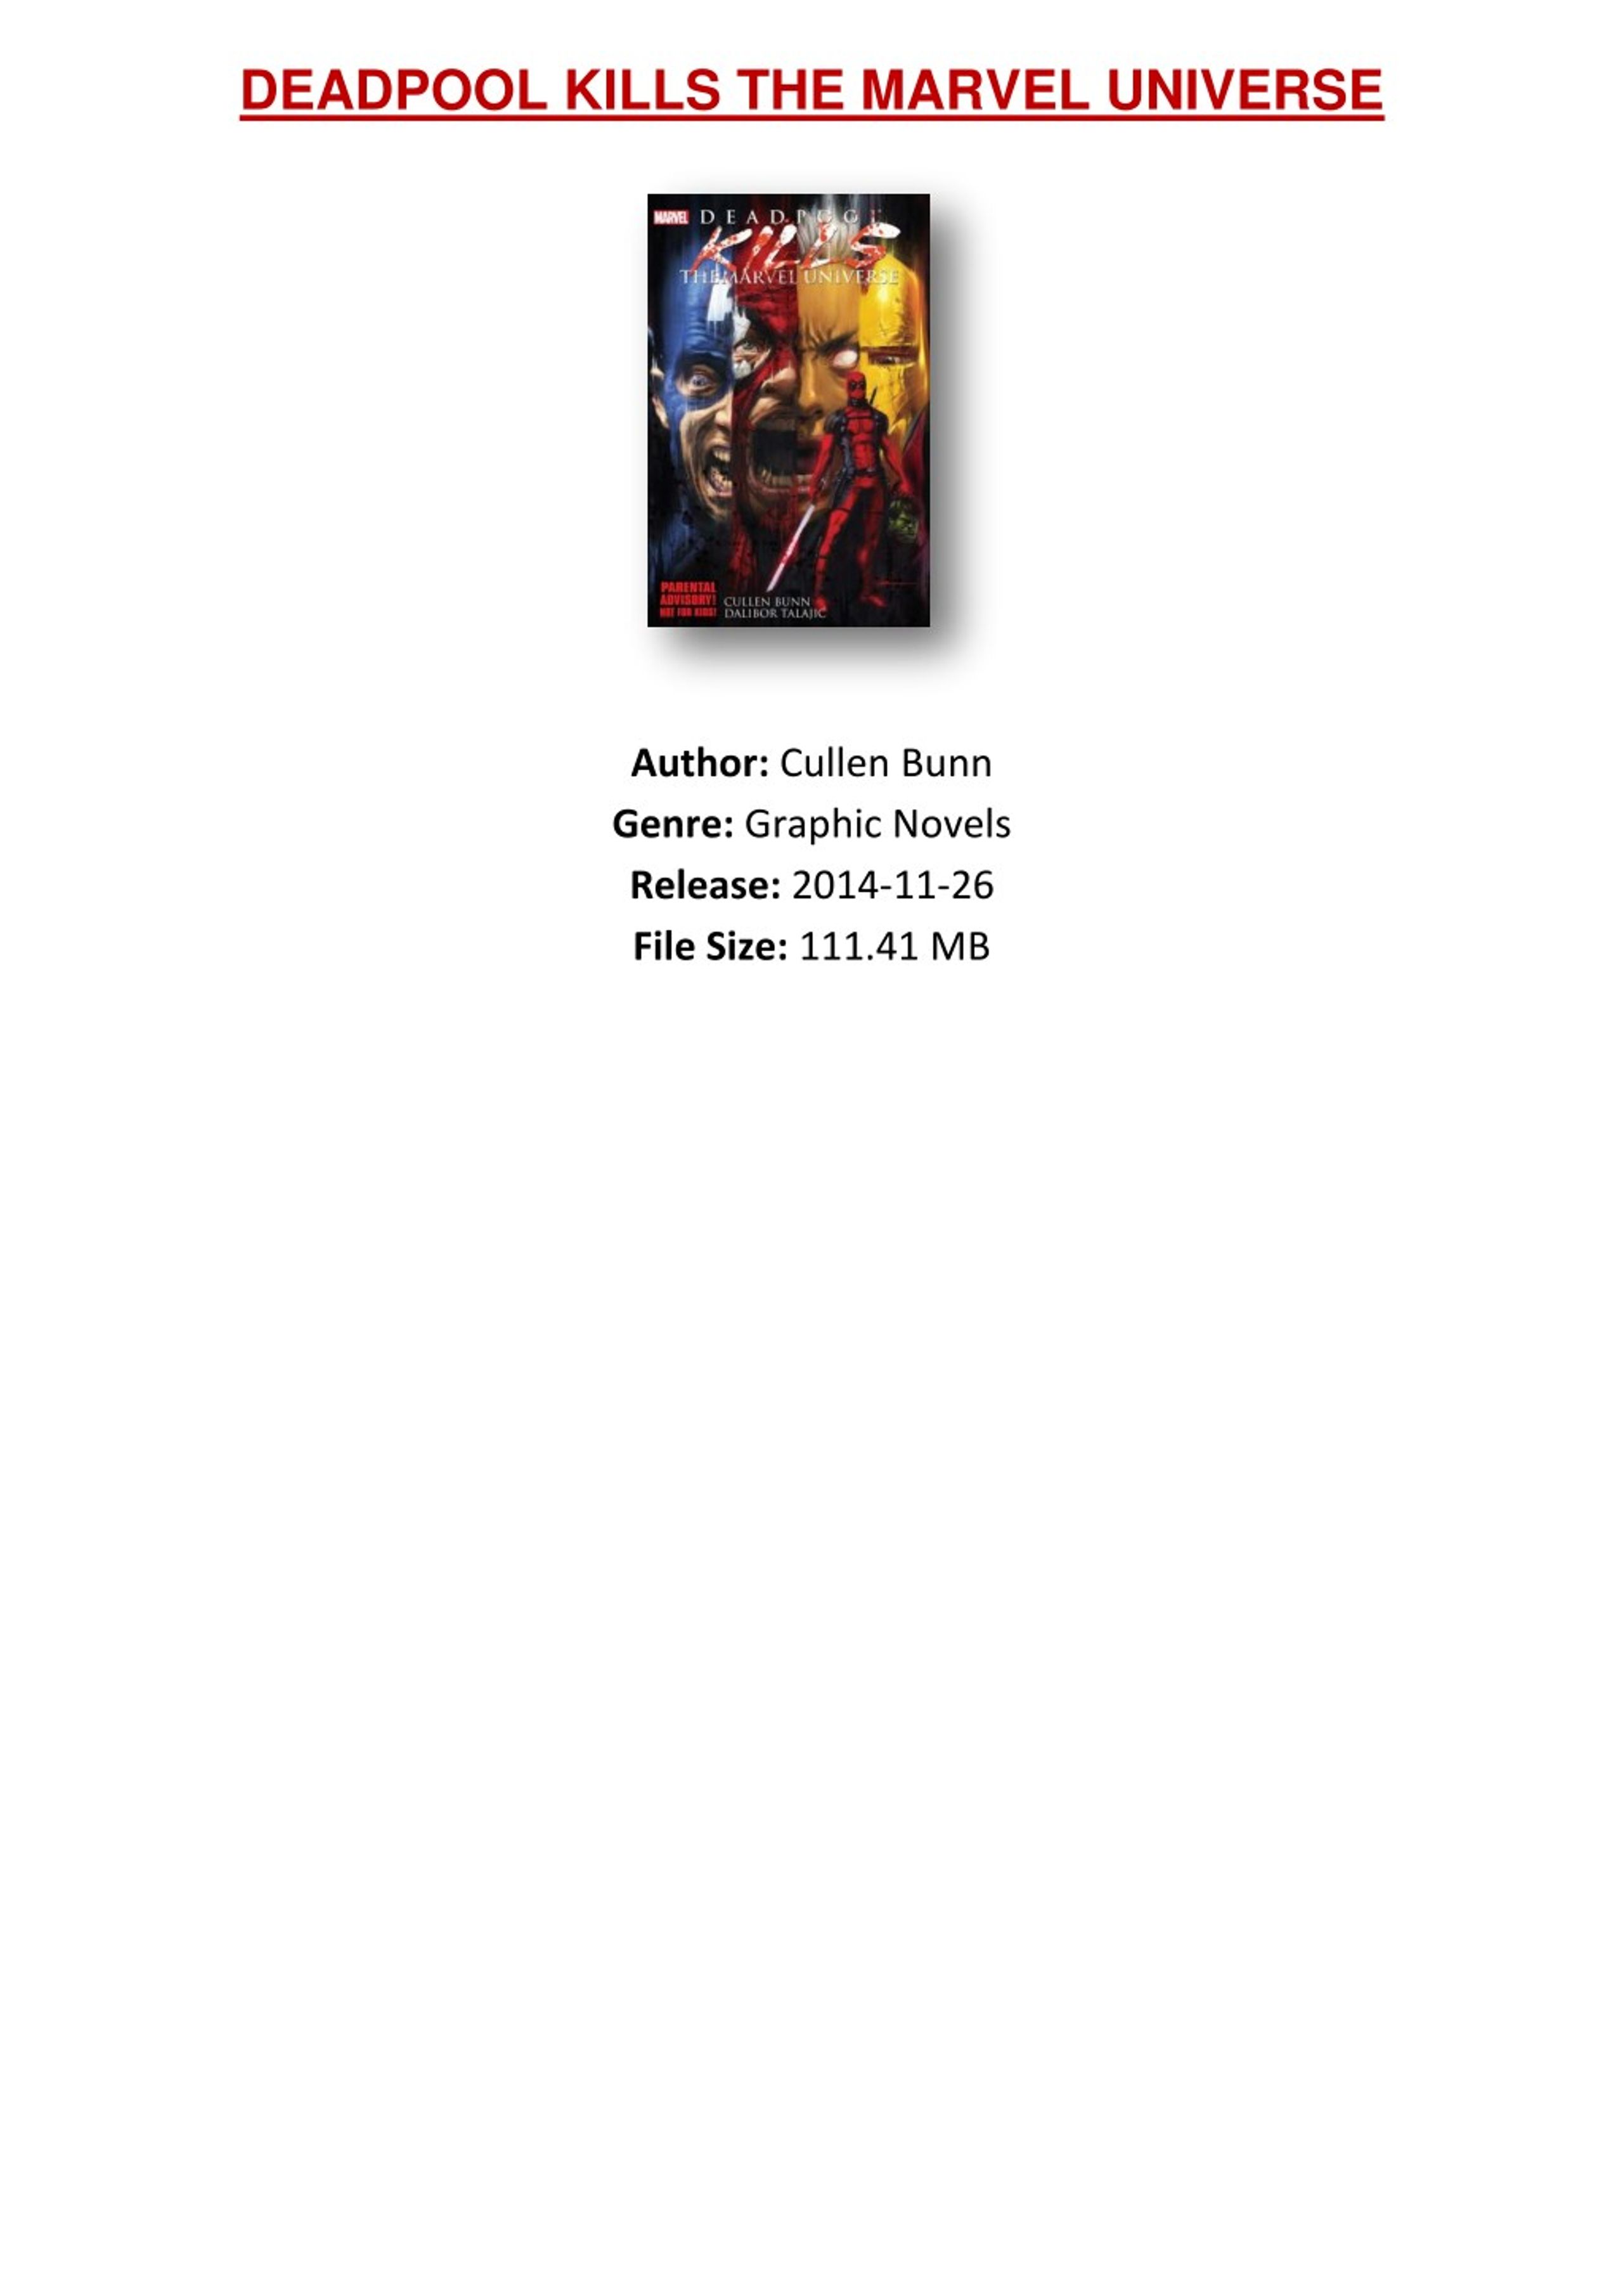 PPT [PDF] Free Download Deadpool Kills The Marvel Universe By Cullen Bunn PowerPoint